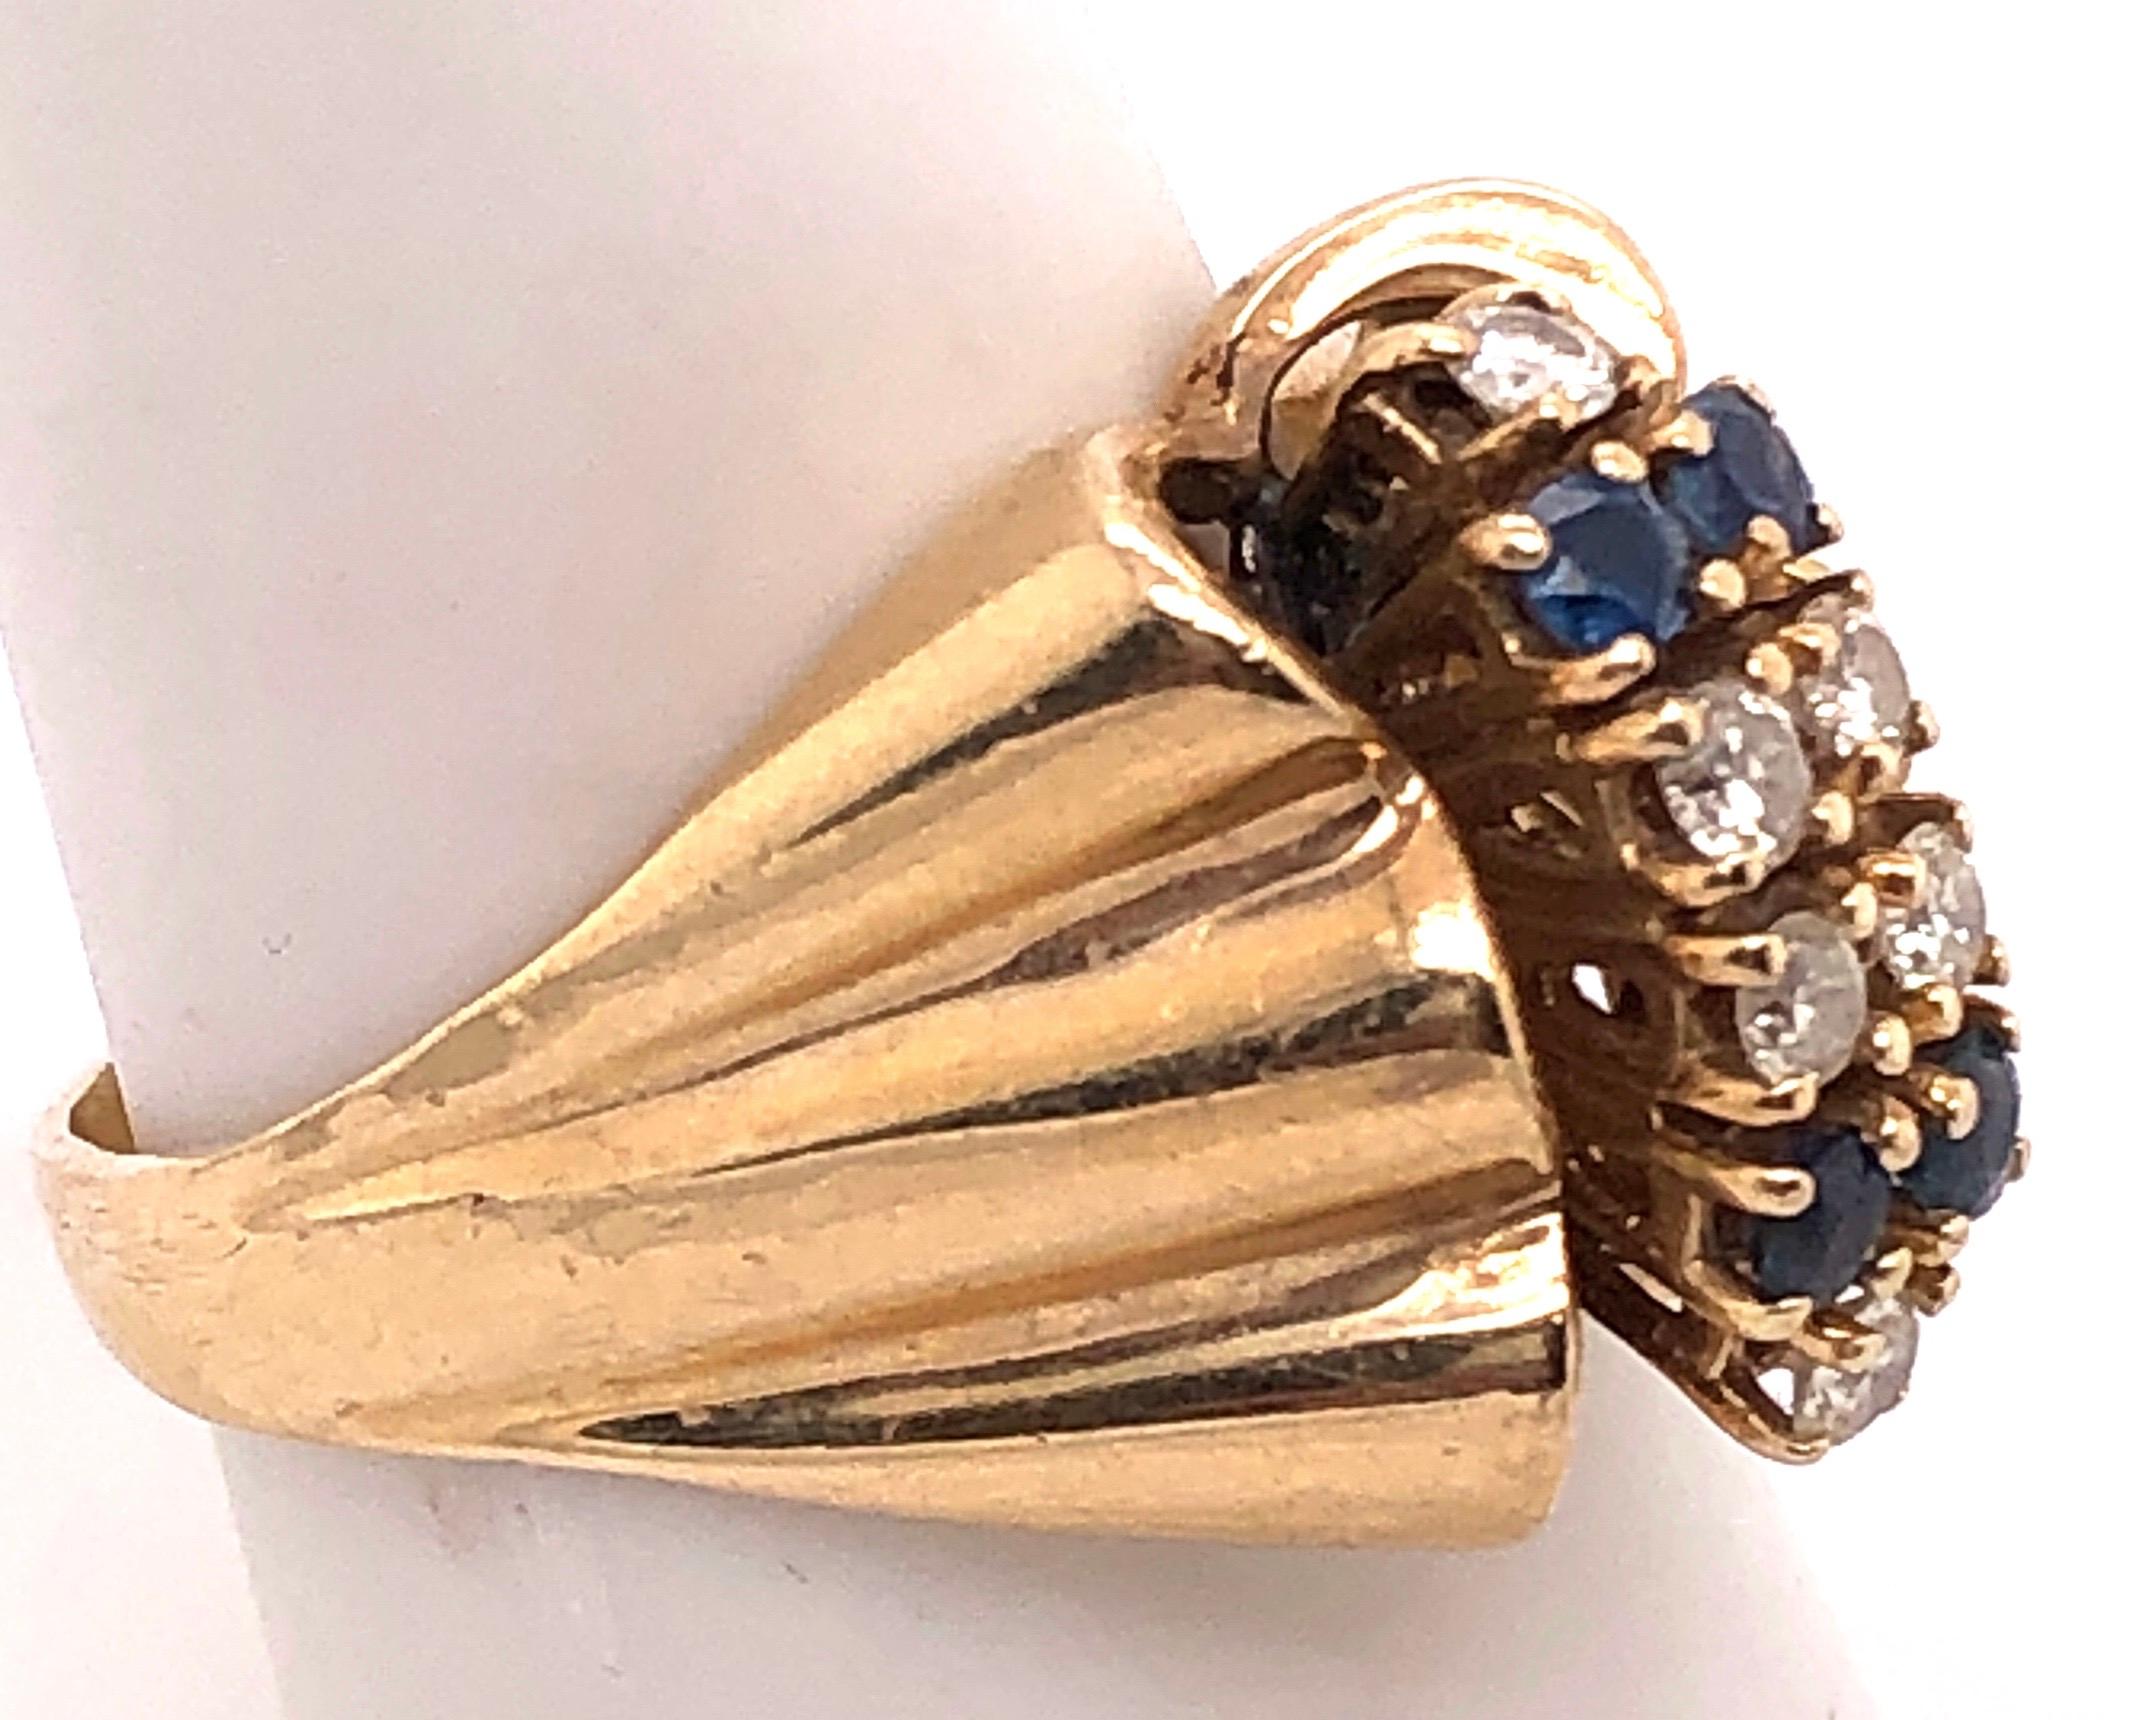 14 Karat Yellow Gold Contemporary Ring with Sapphire and Diamonds.
Size 8
7.6 grams total weight.